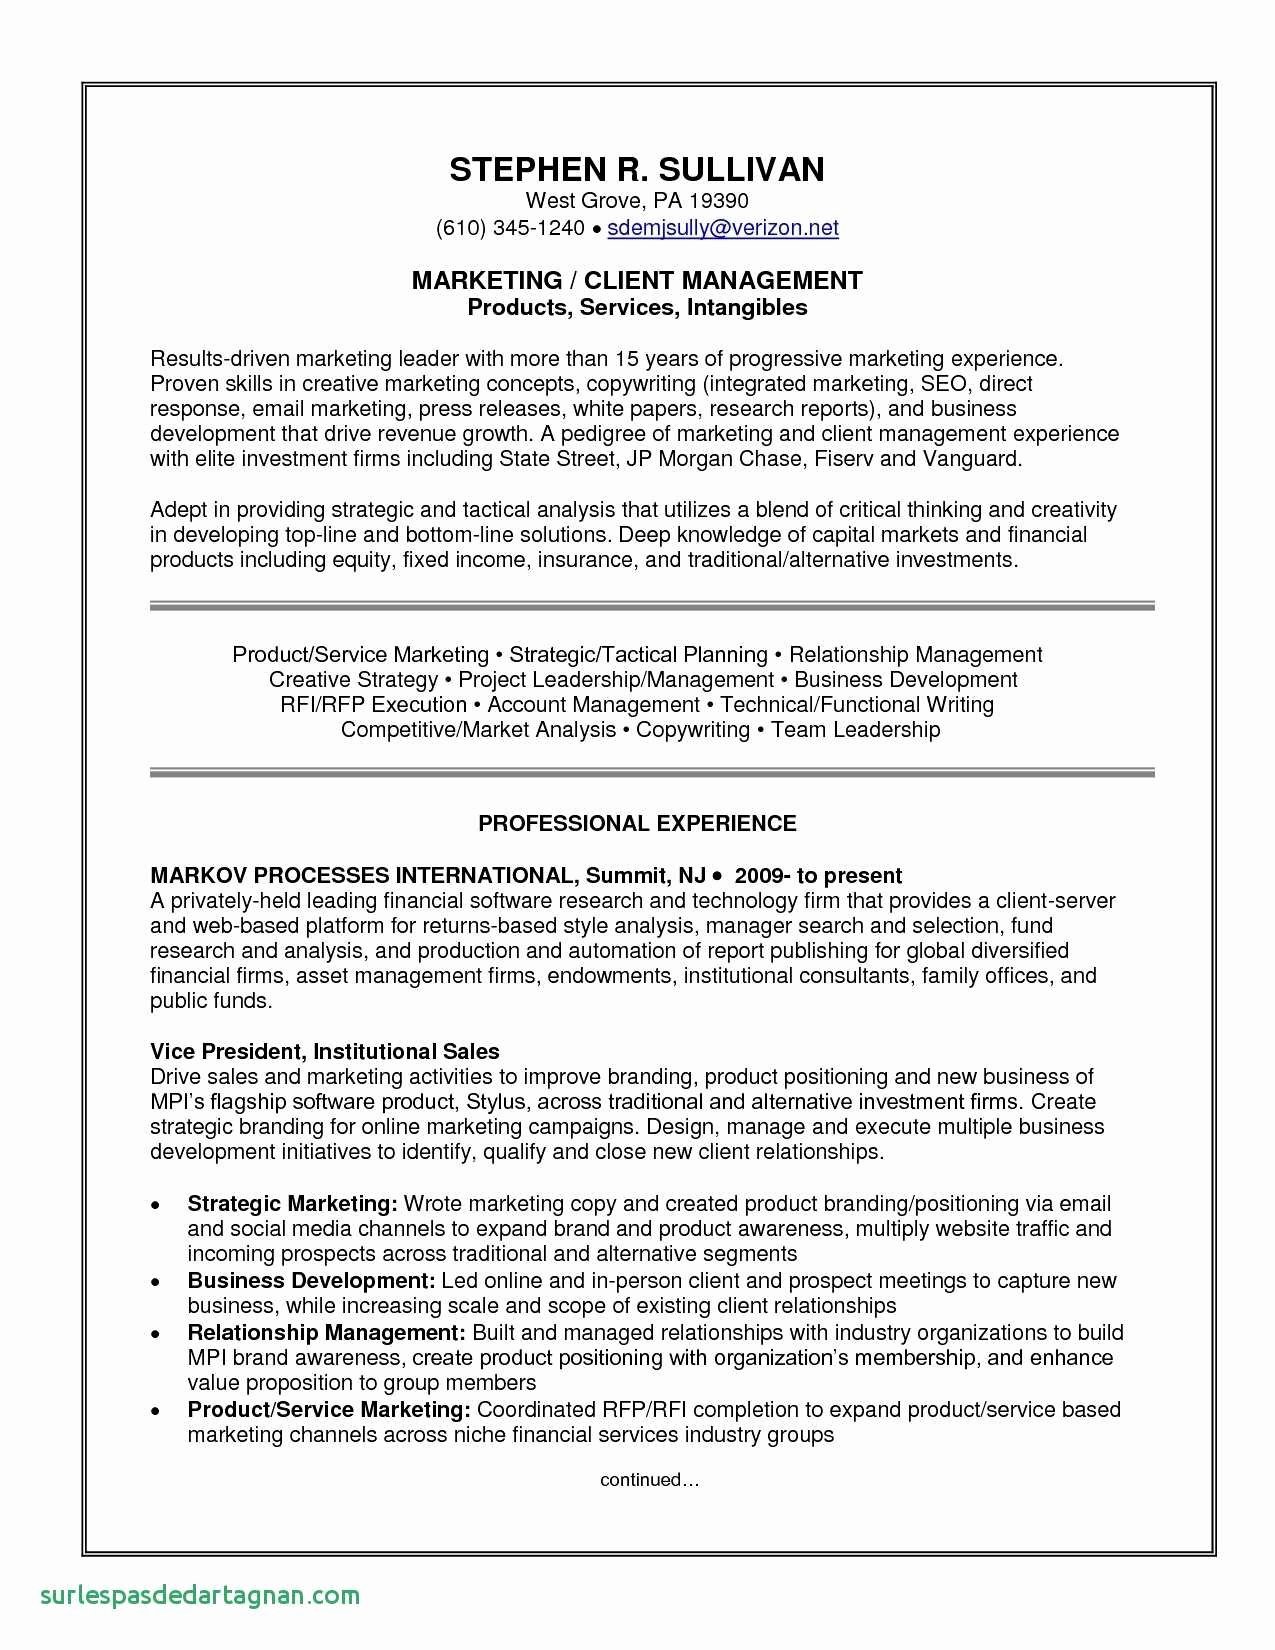 Create Your Resume New Free How to Make Resume Sample